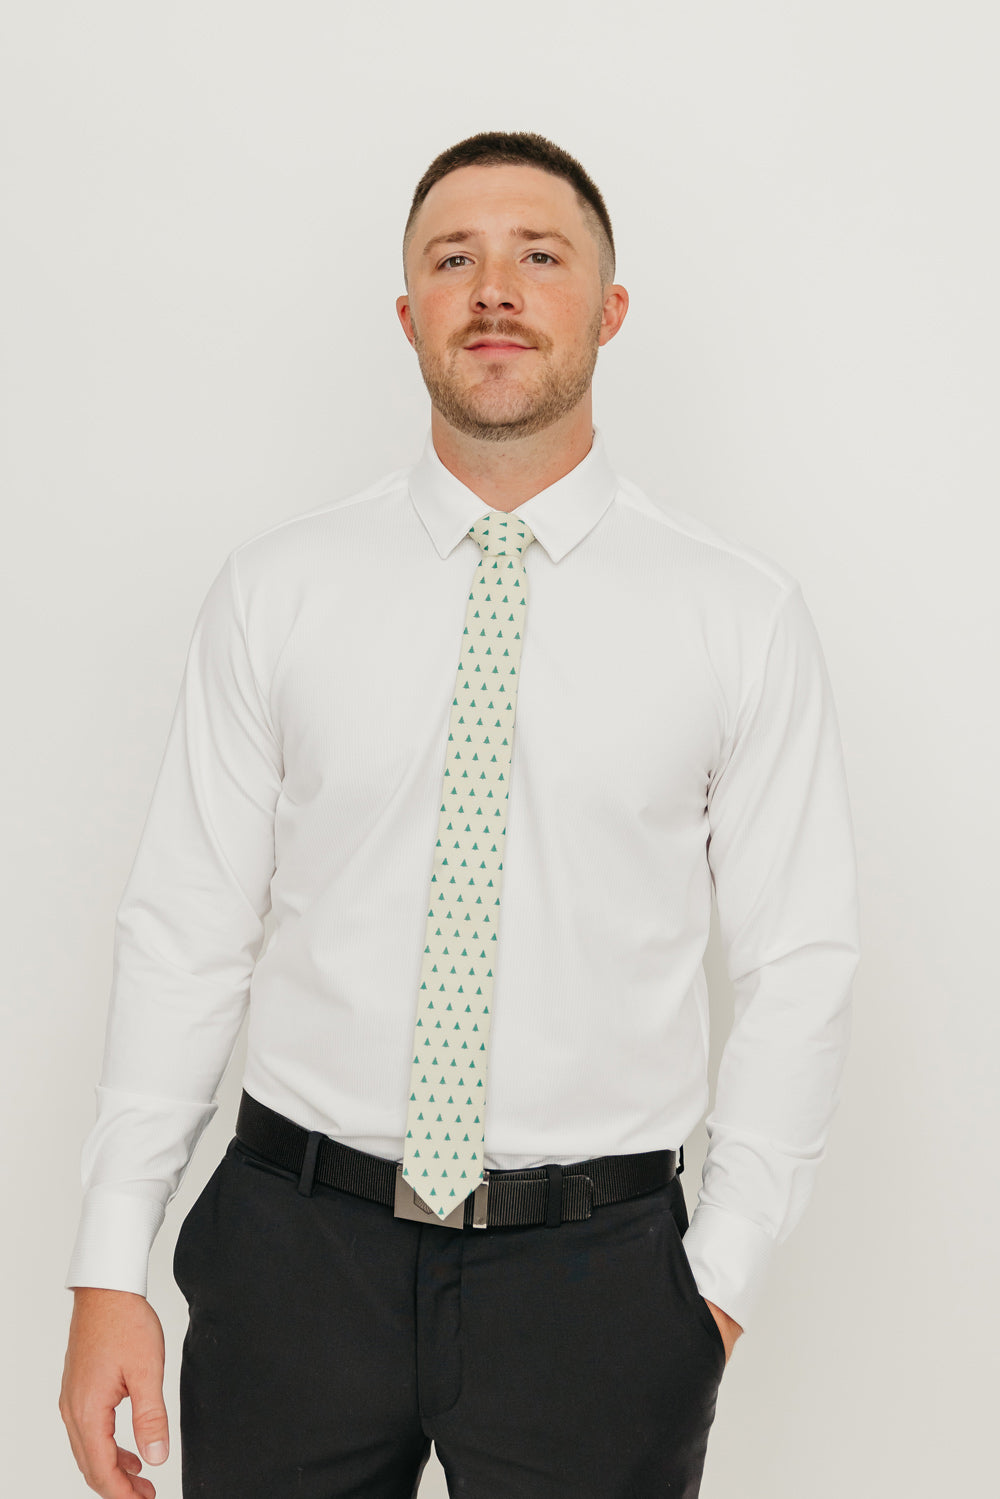 Pine 2.5" Wide Skinny Tie worn with a white shirt, black belt and black suit pants.